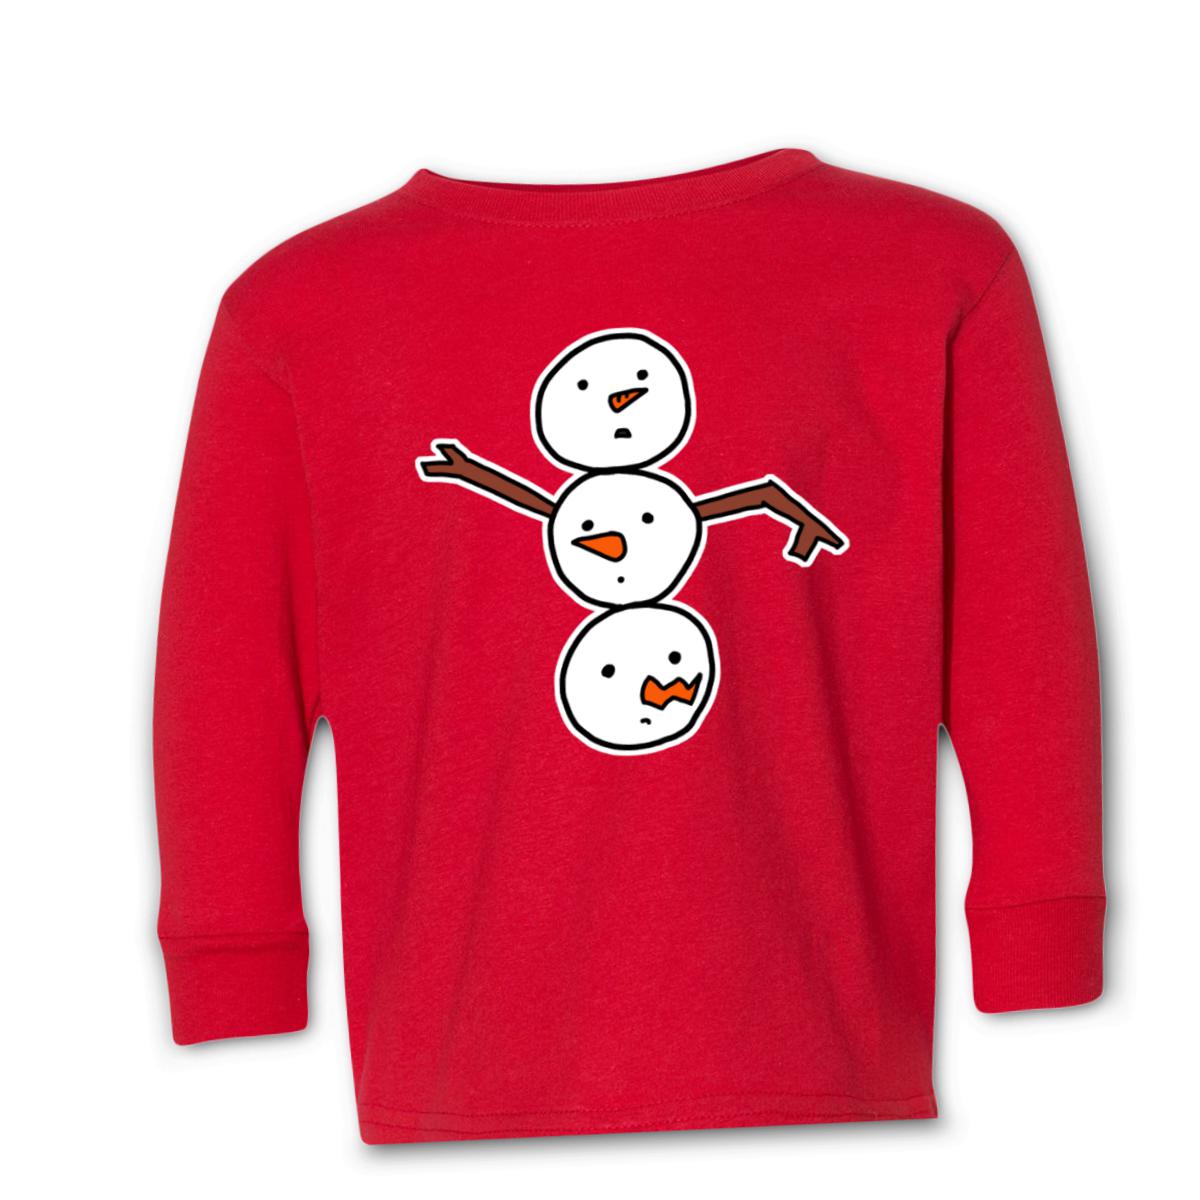 Snowman All Heads Kid's Long Sleeve Tee Small red